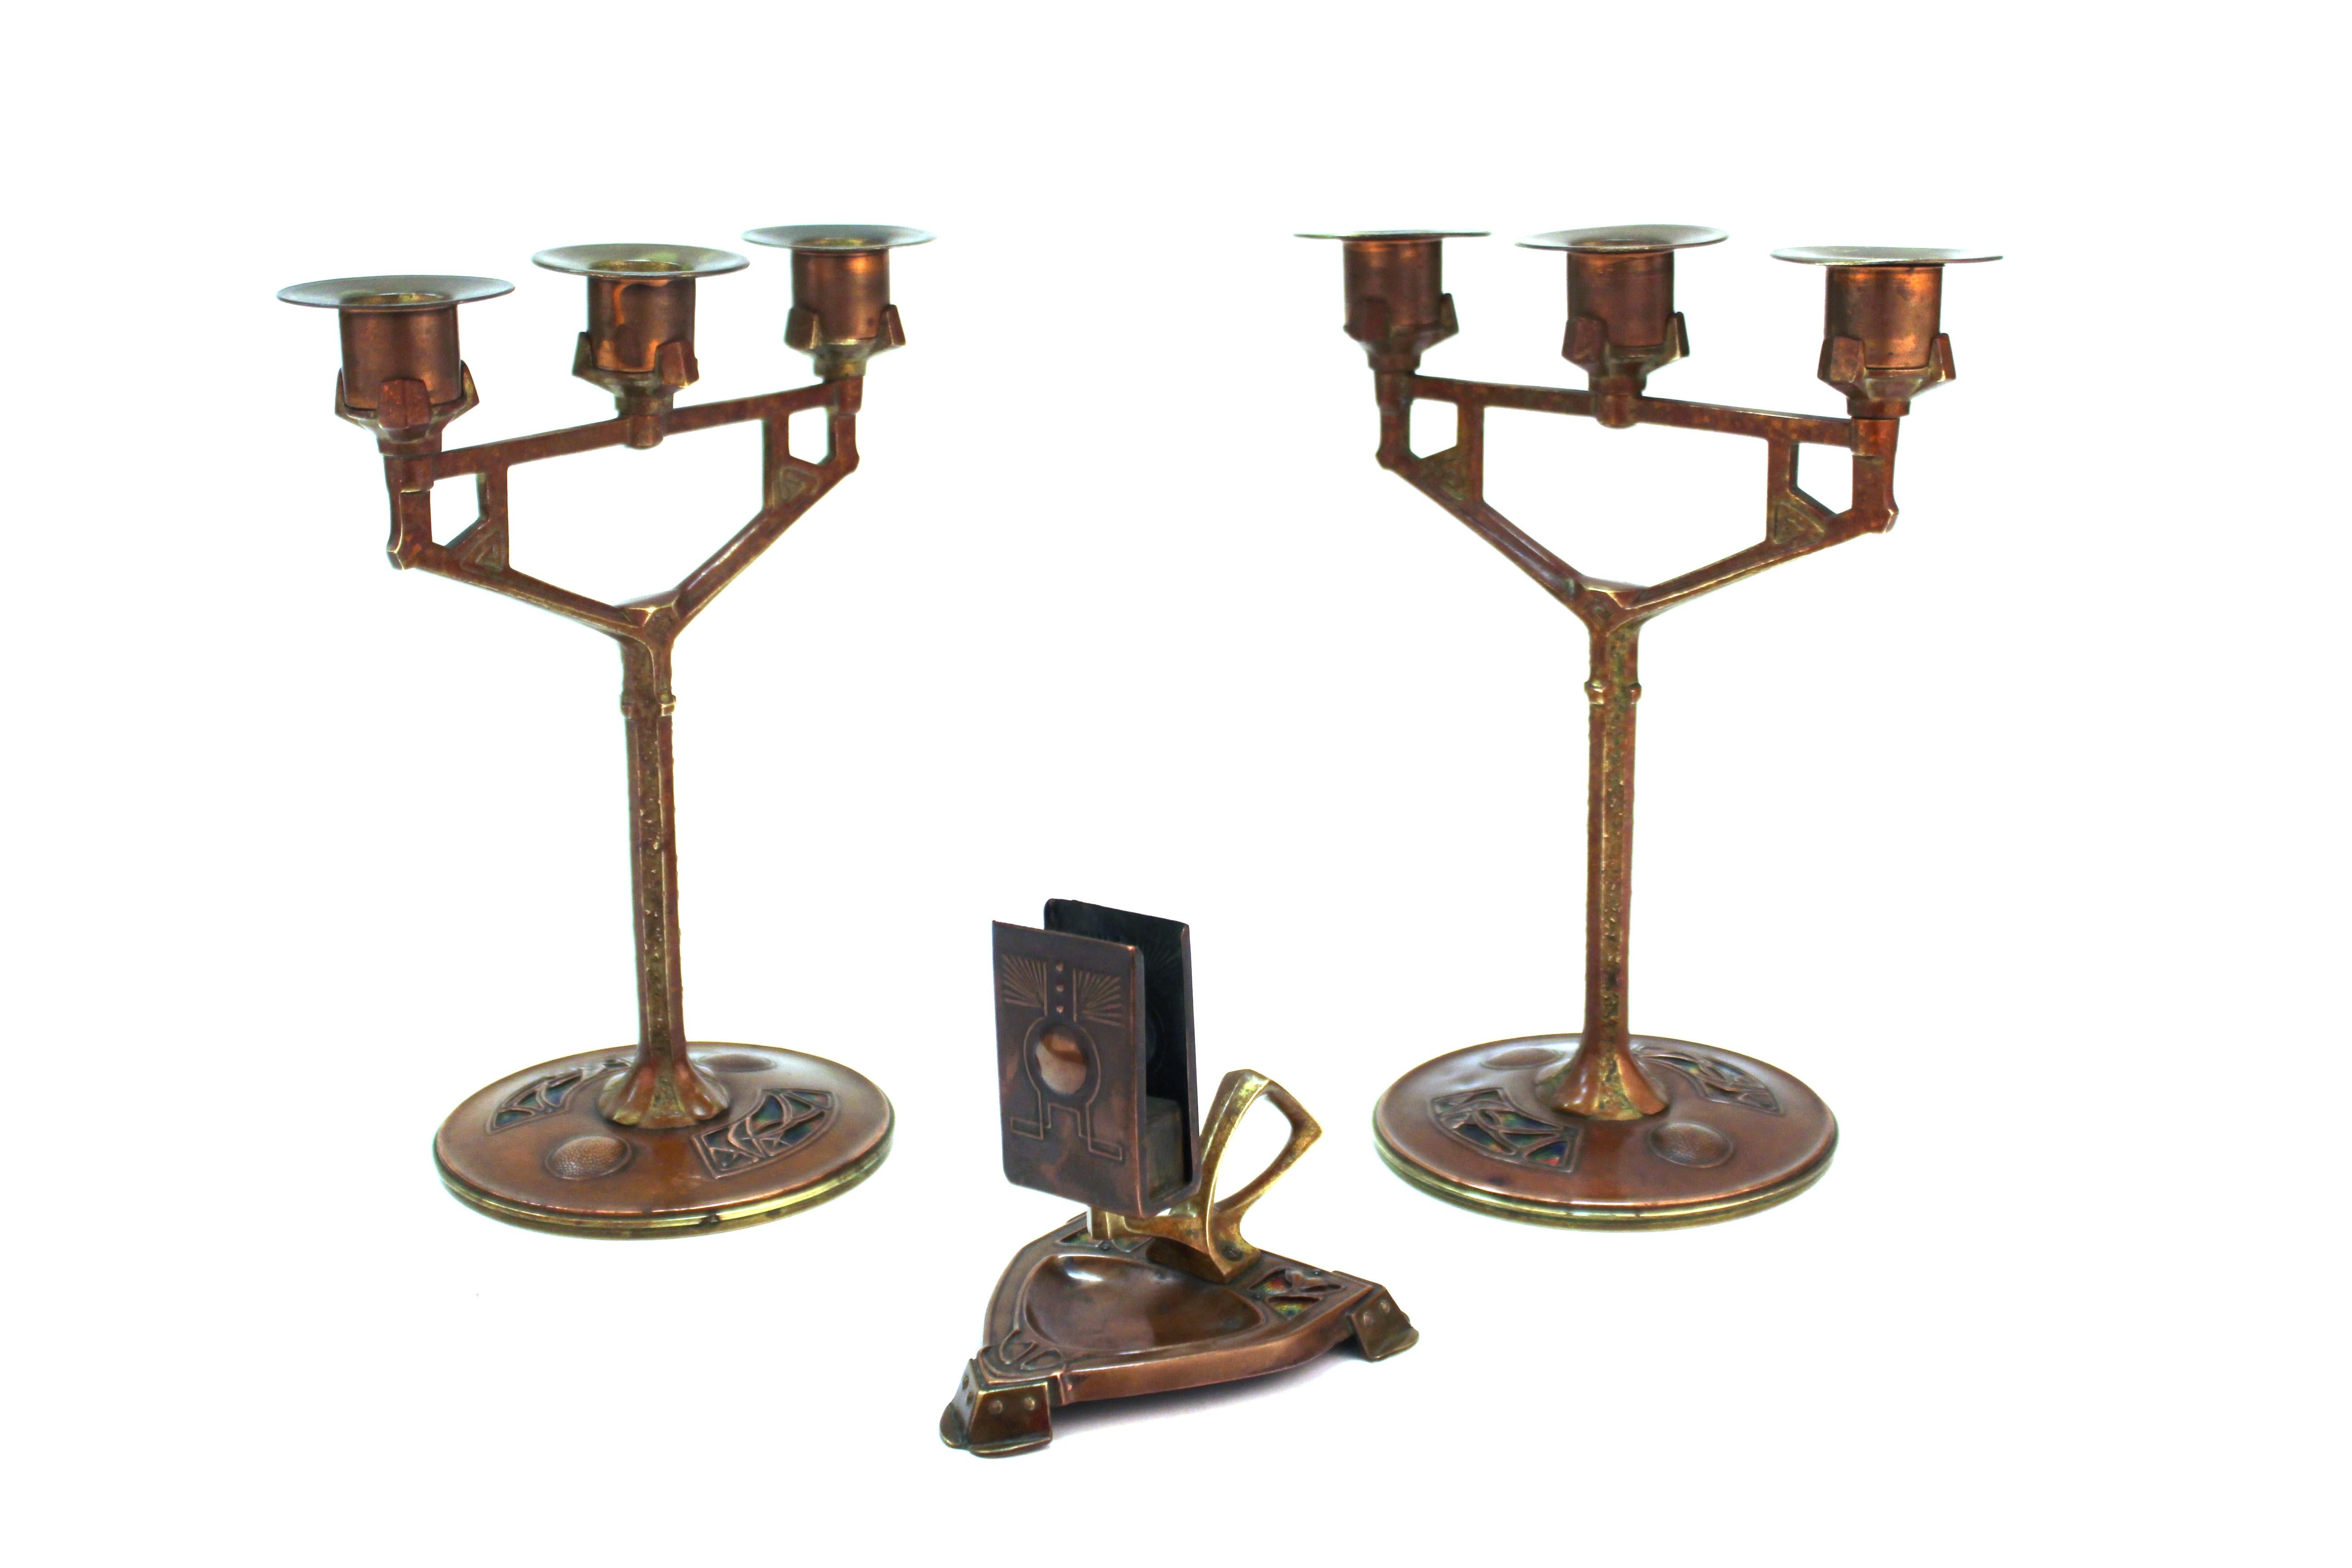 German Jugendstil period pair of three-armed candelabra with match-safe, created in Germany around 1900. The set is made of bronze, copper, brass and enamel and has a desirable age-appropriate patina.